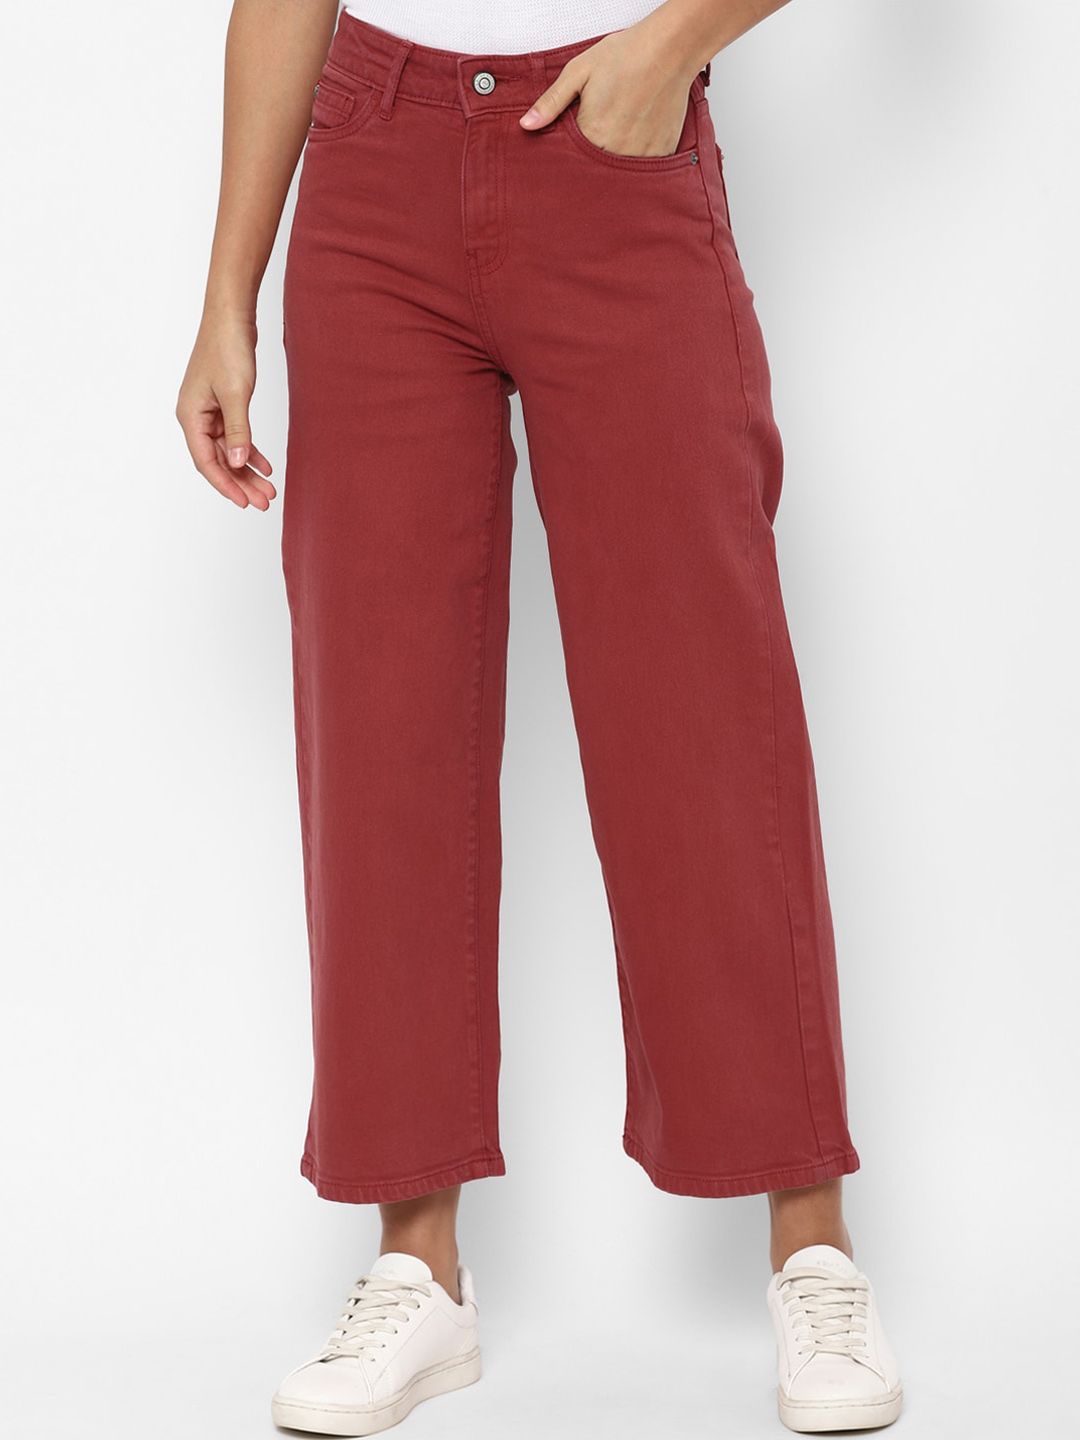 Allen Solly Woman Women Maroon Mid-Rise Jeans Price in India